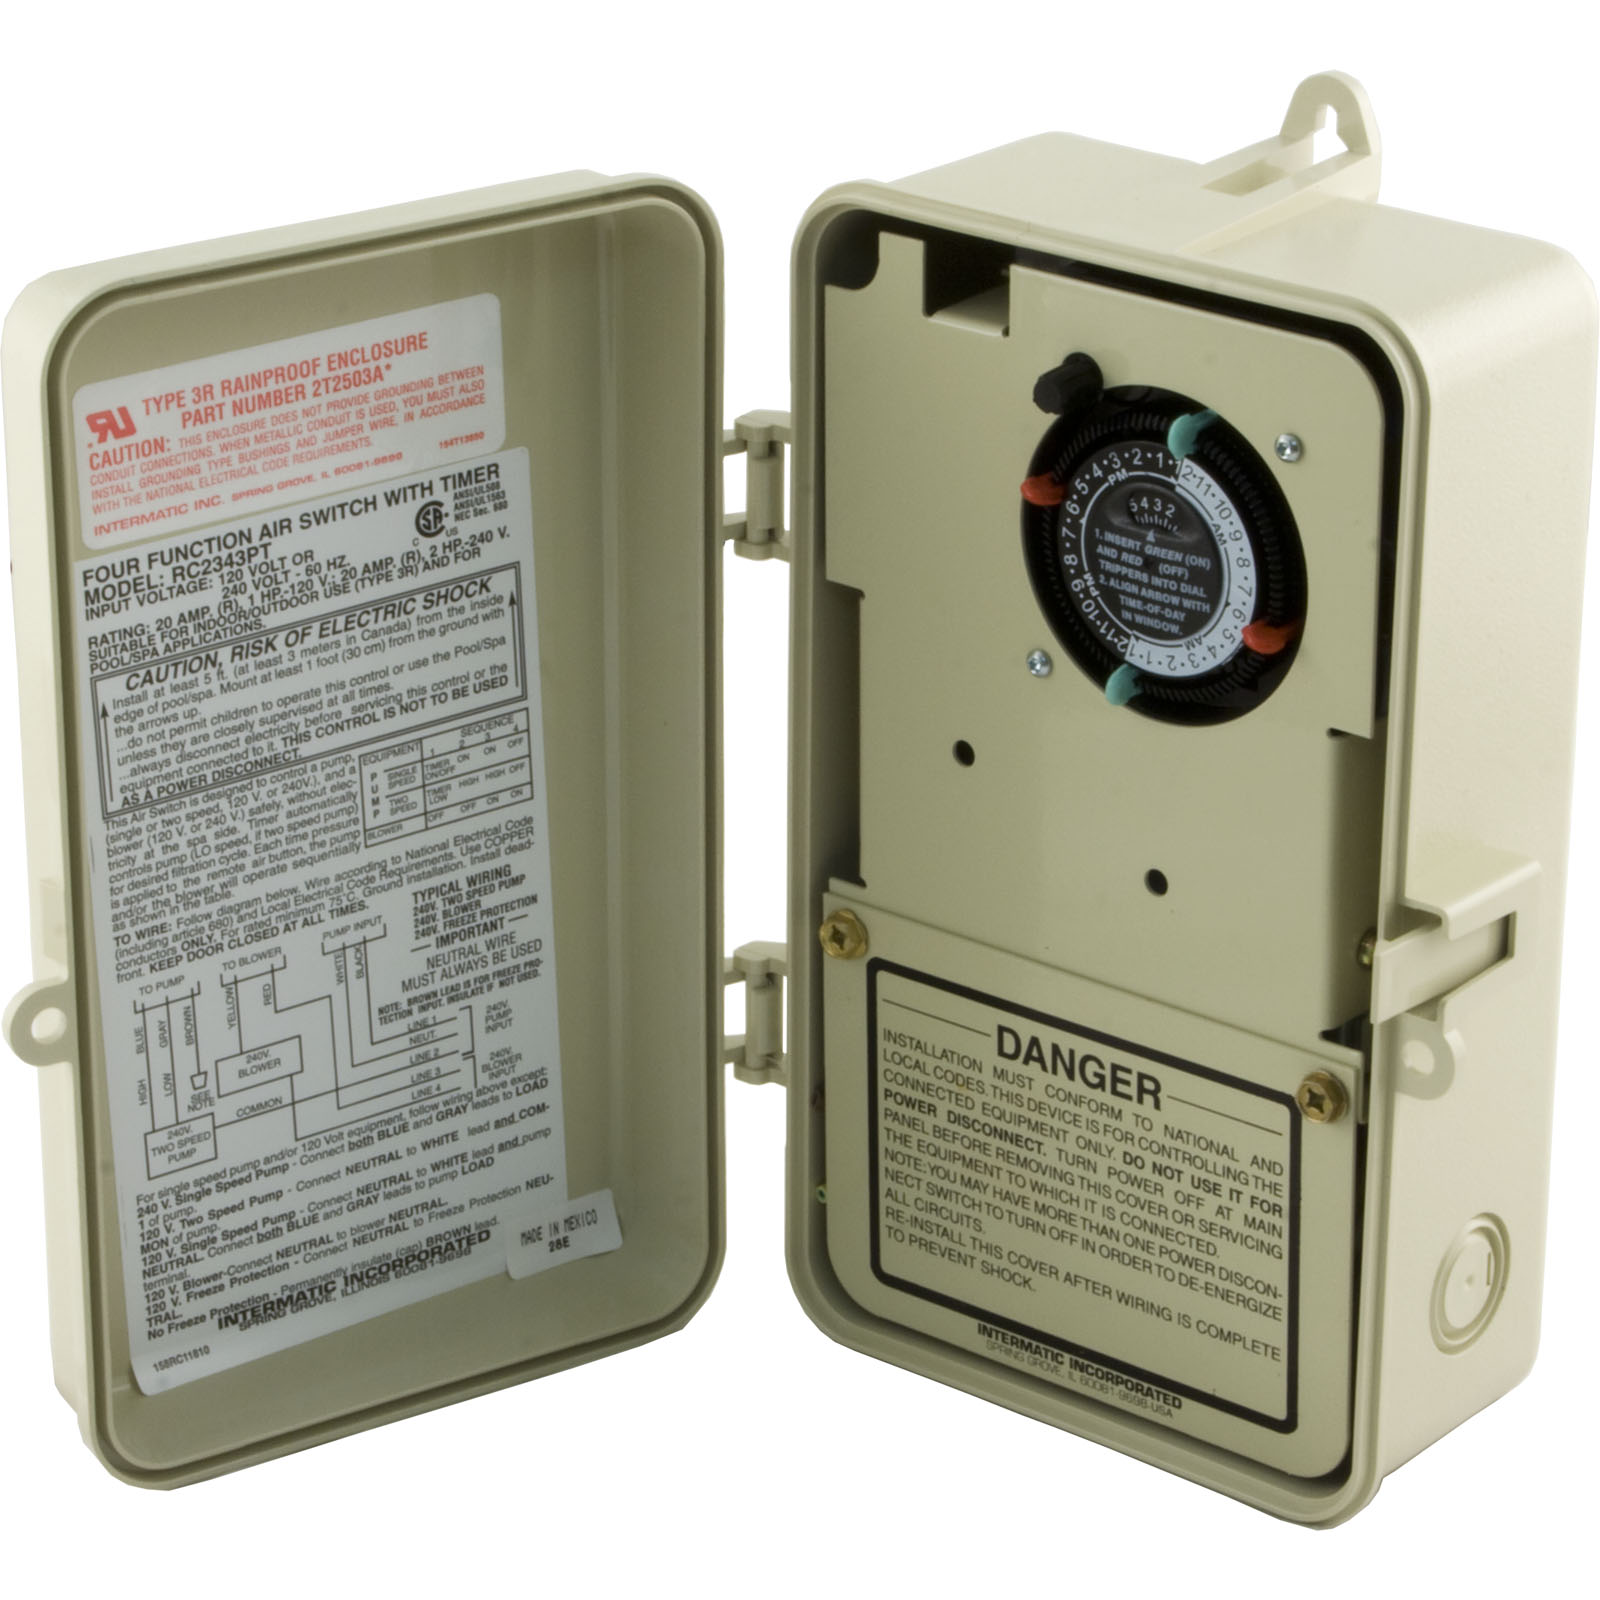 Picture of RC2343PT Air Control Box Intermatic 115v/230vFour Function Timer